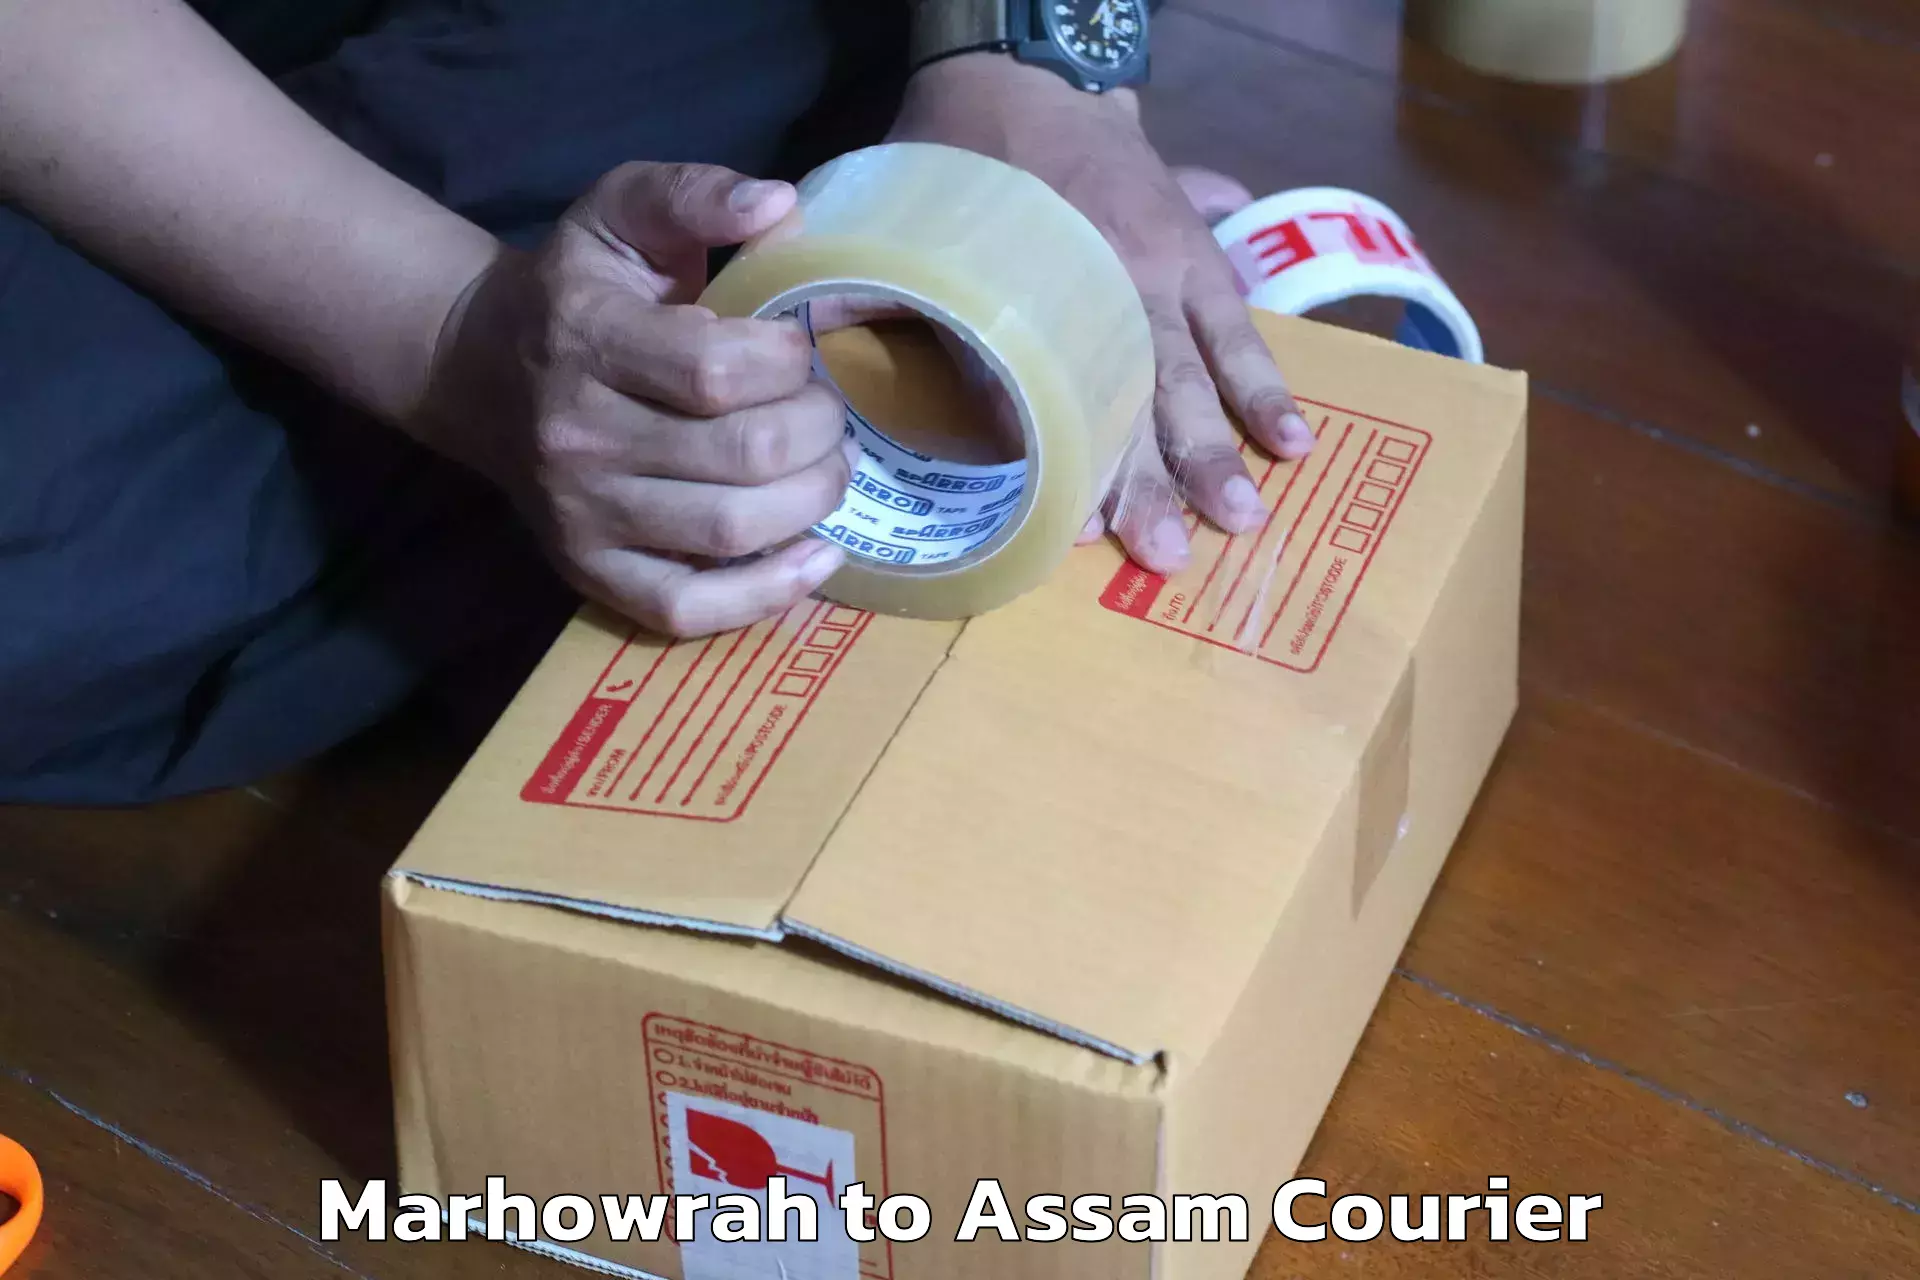 Furniture delivery service Marhowrah to Assam